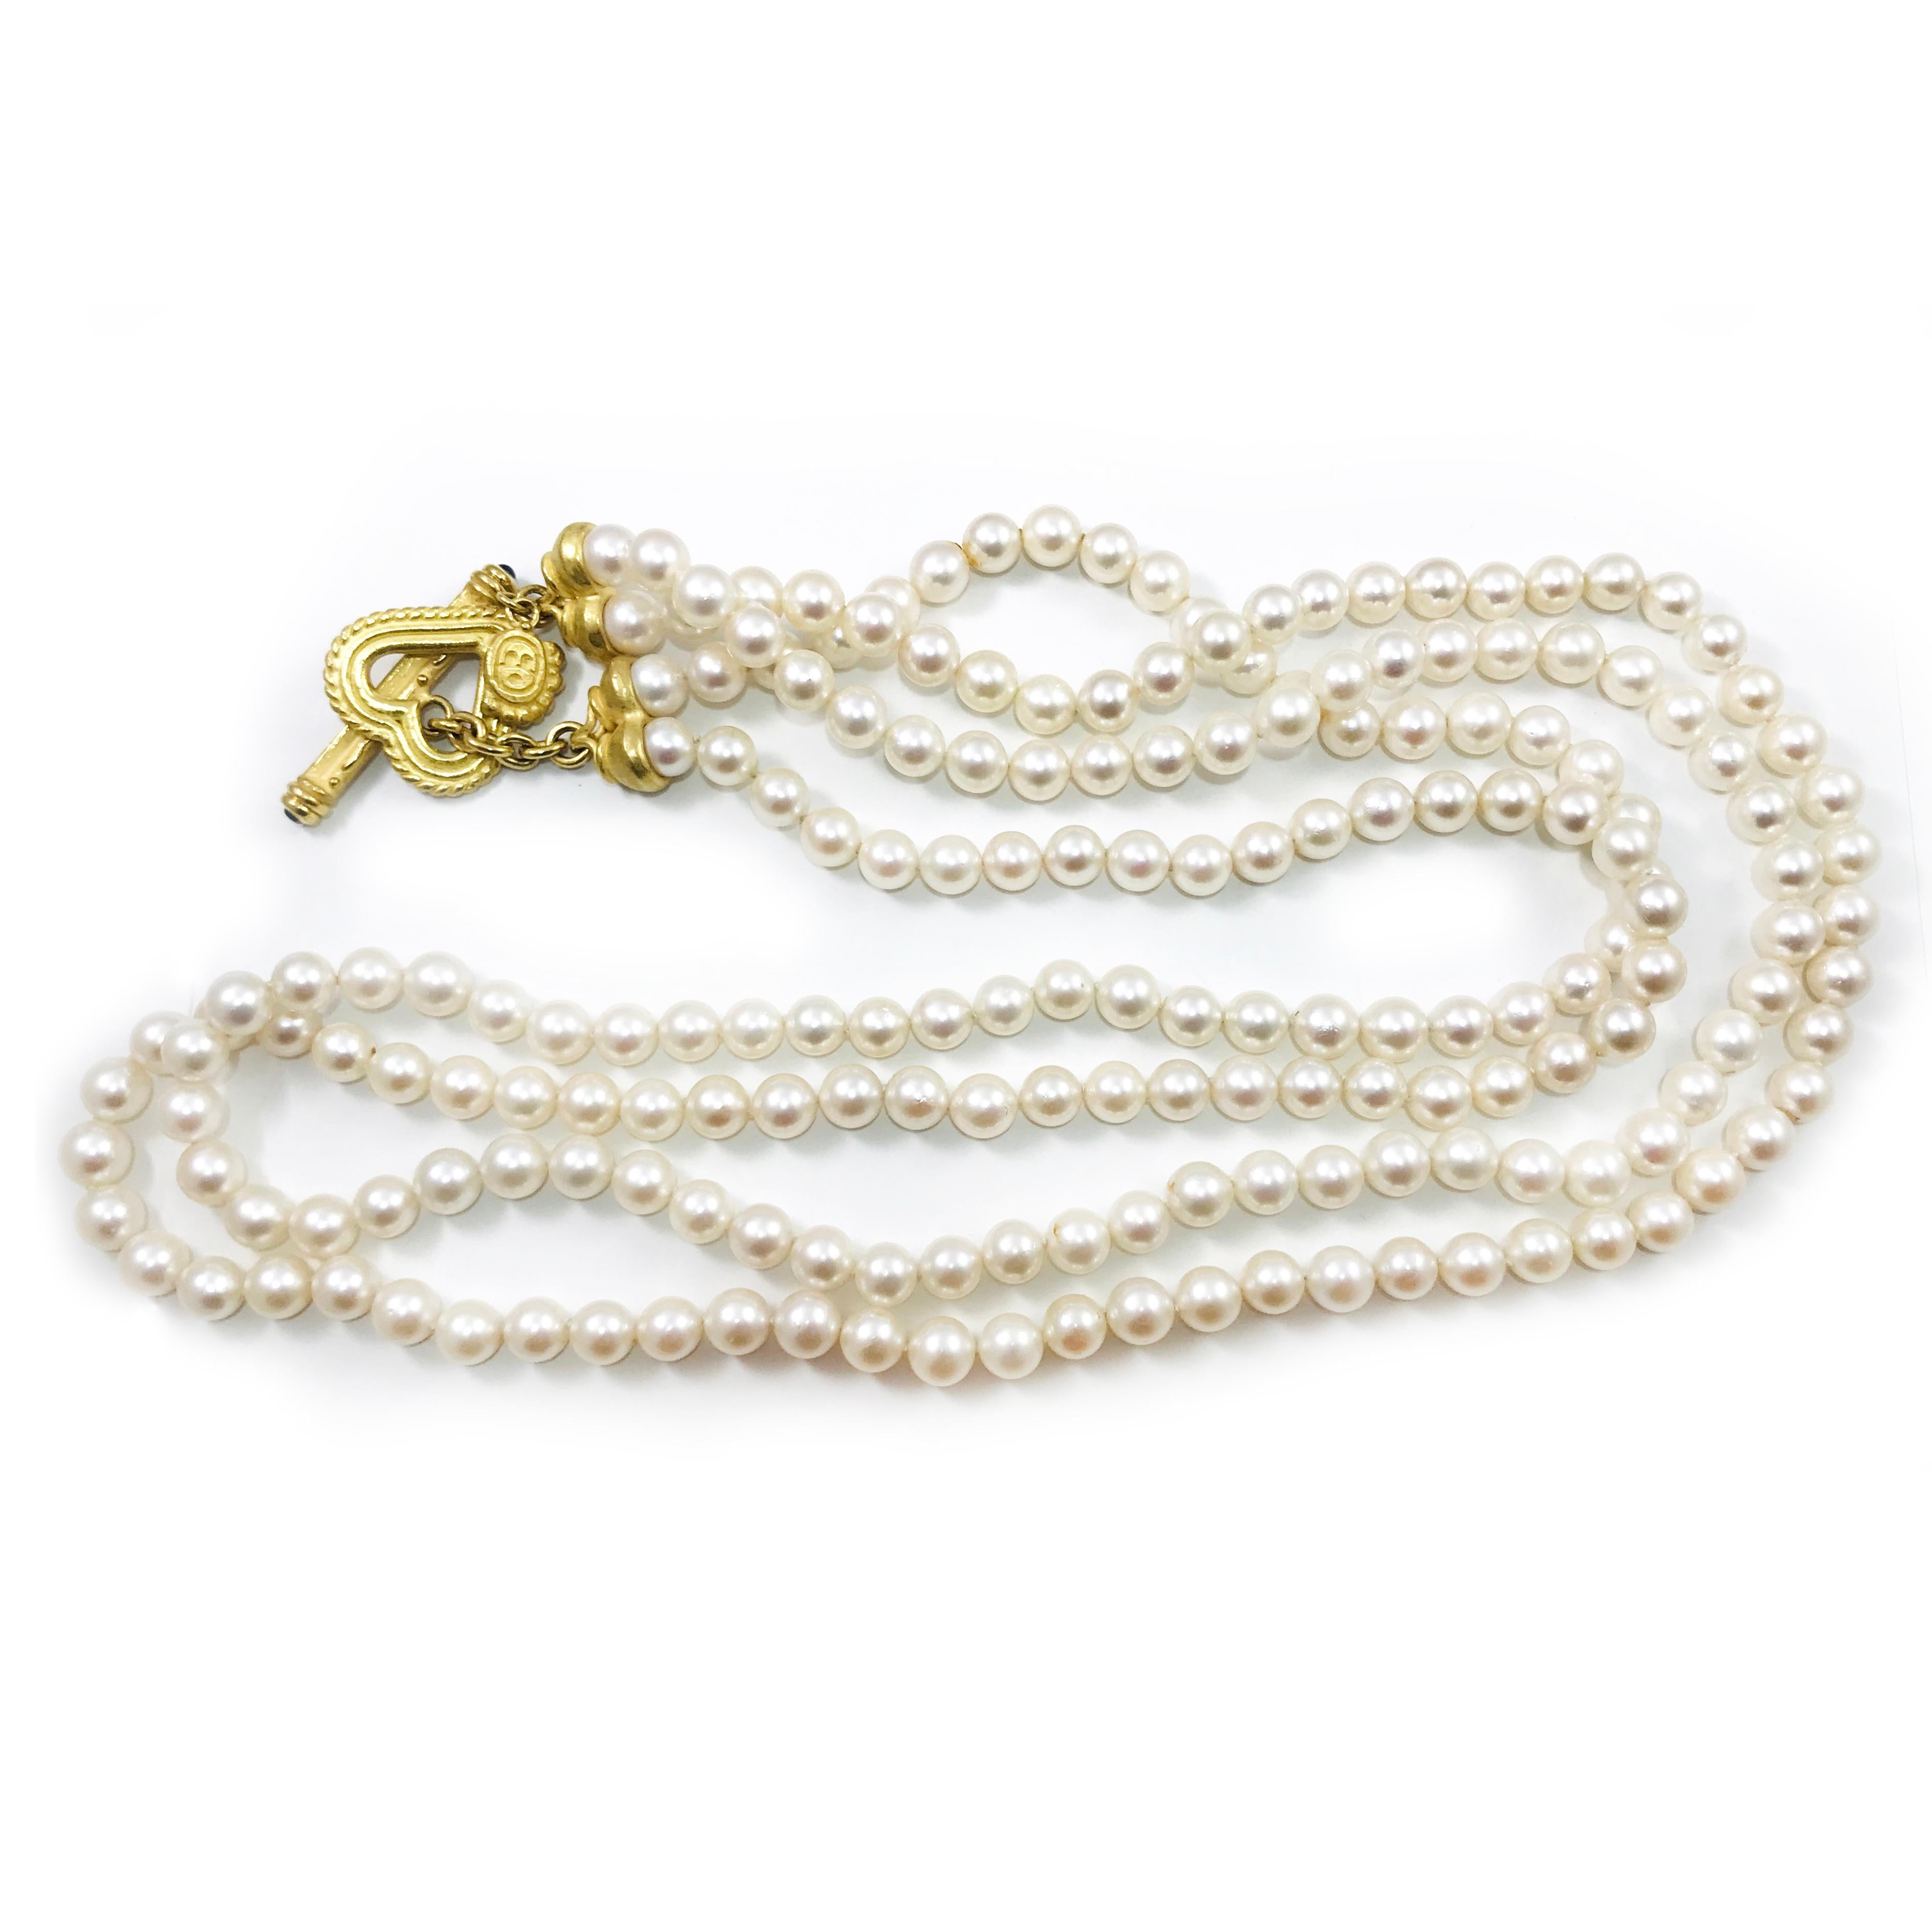 Denise Roberge Opera Length 22 Karat Gold Two-Strand Japanese Pearl Necklace. One strand of 96 Pearls and the other strand of 100 Pearls for a total of 196 Pearls measuring 7.0-7.5mm. The roundness of the Pearl and the depth and consistency of